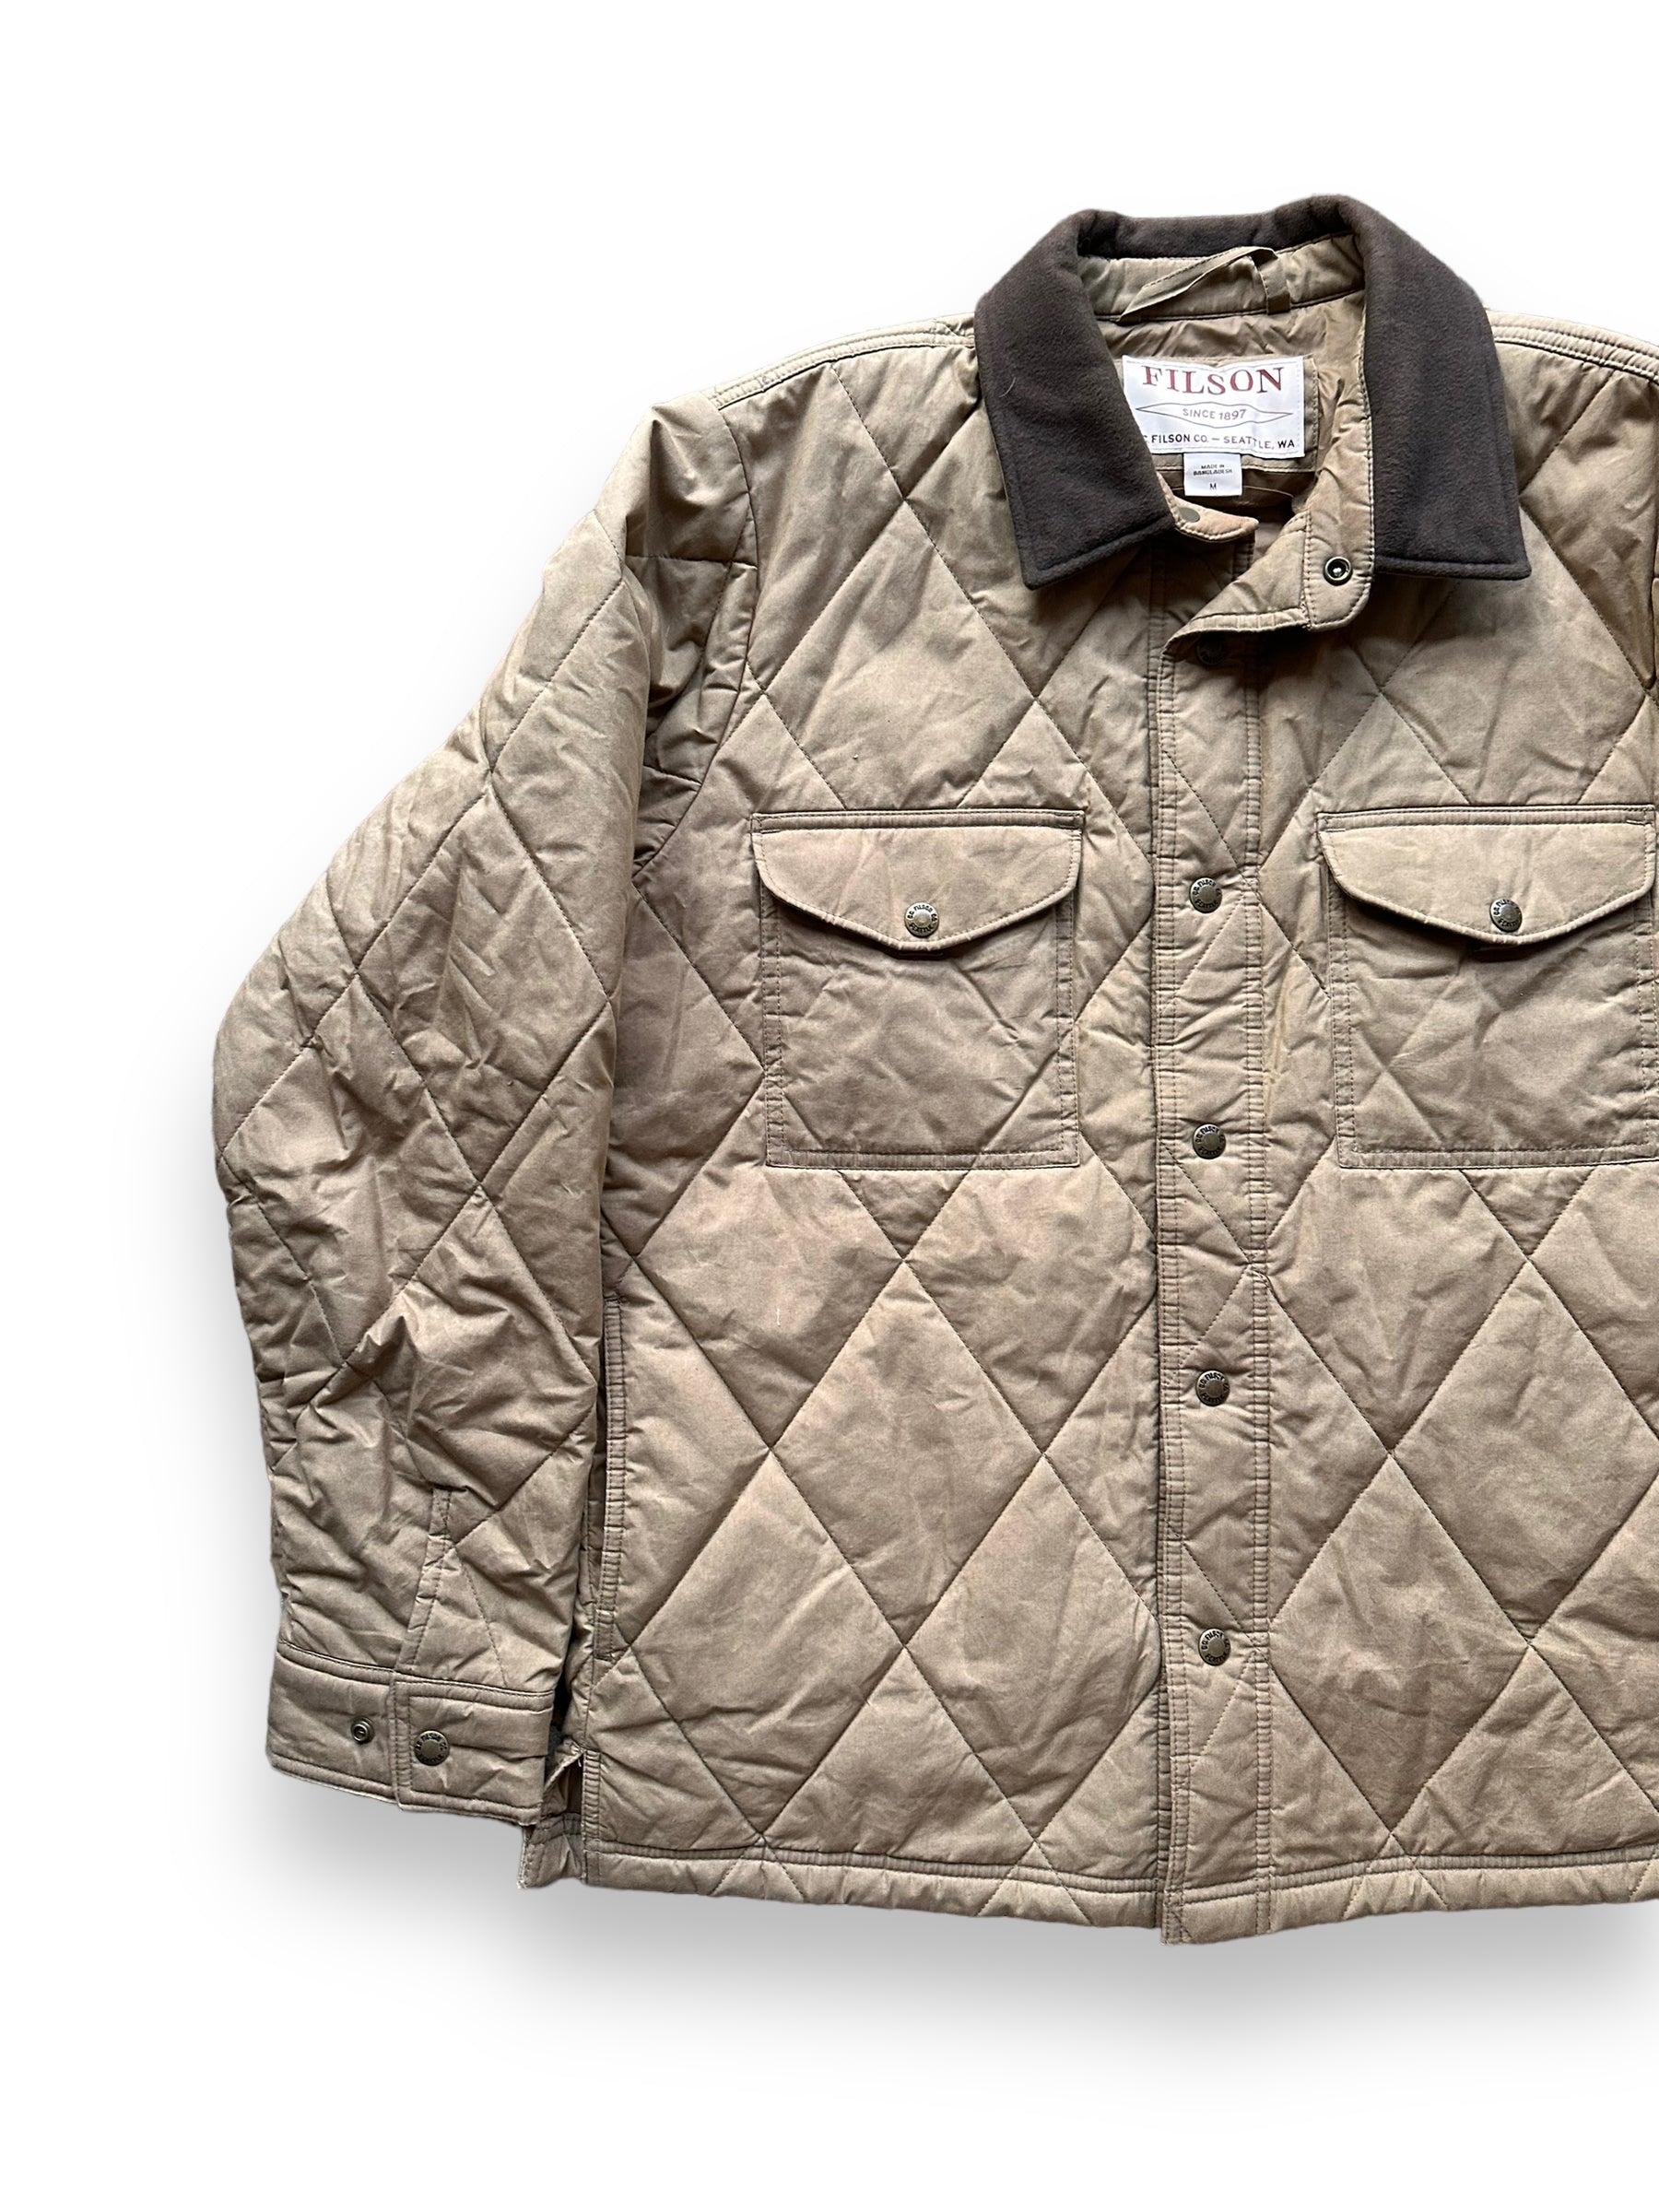 Front Right View of Filson Hyder Quilted Jac Primaloft Waxed Jacket SZ M |  Barn Owl Vintage Goods | Vintage Filson Workwear Seattle